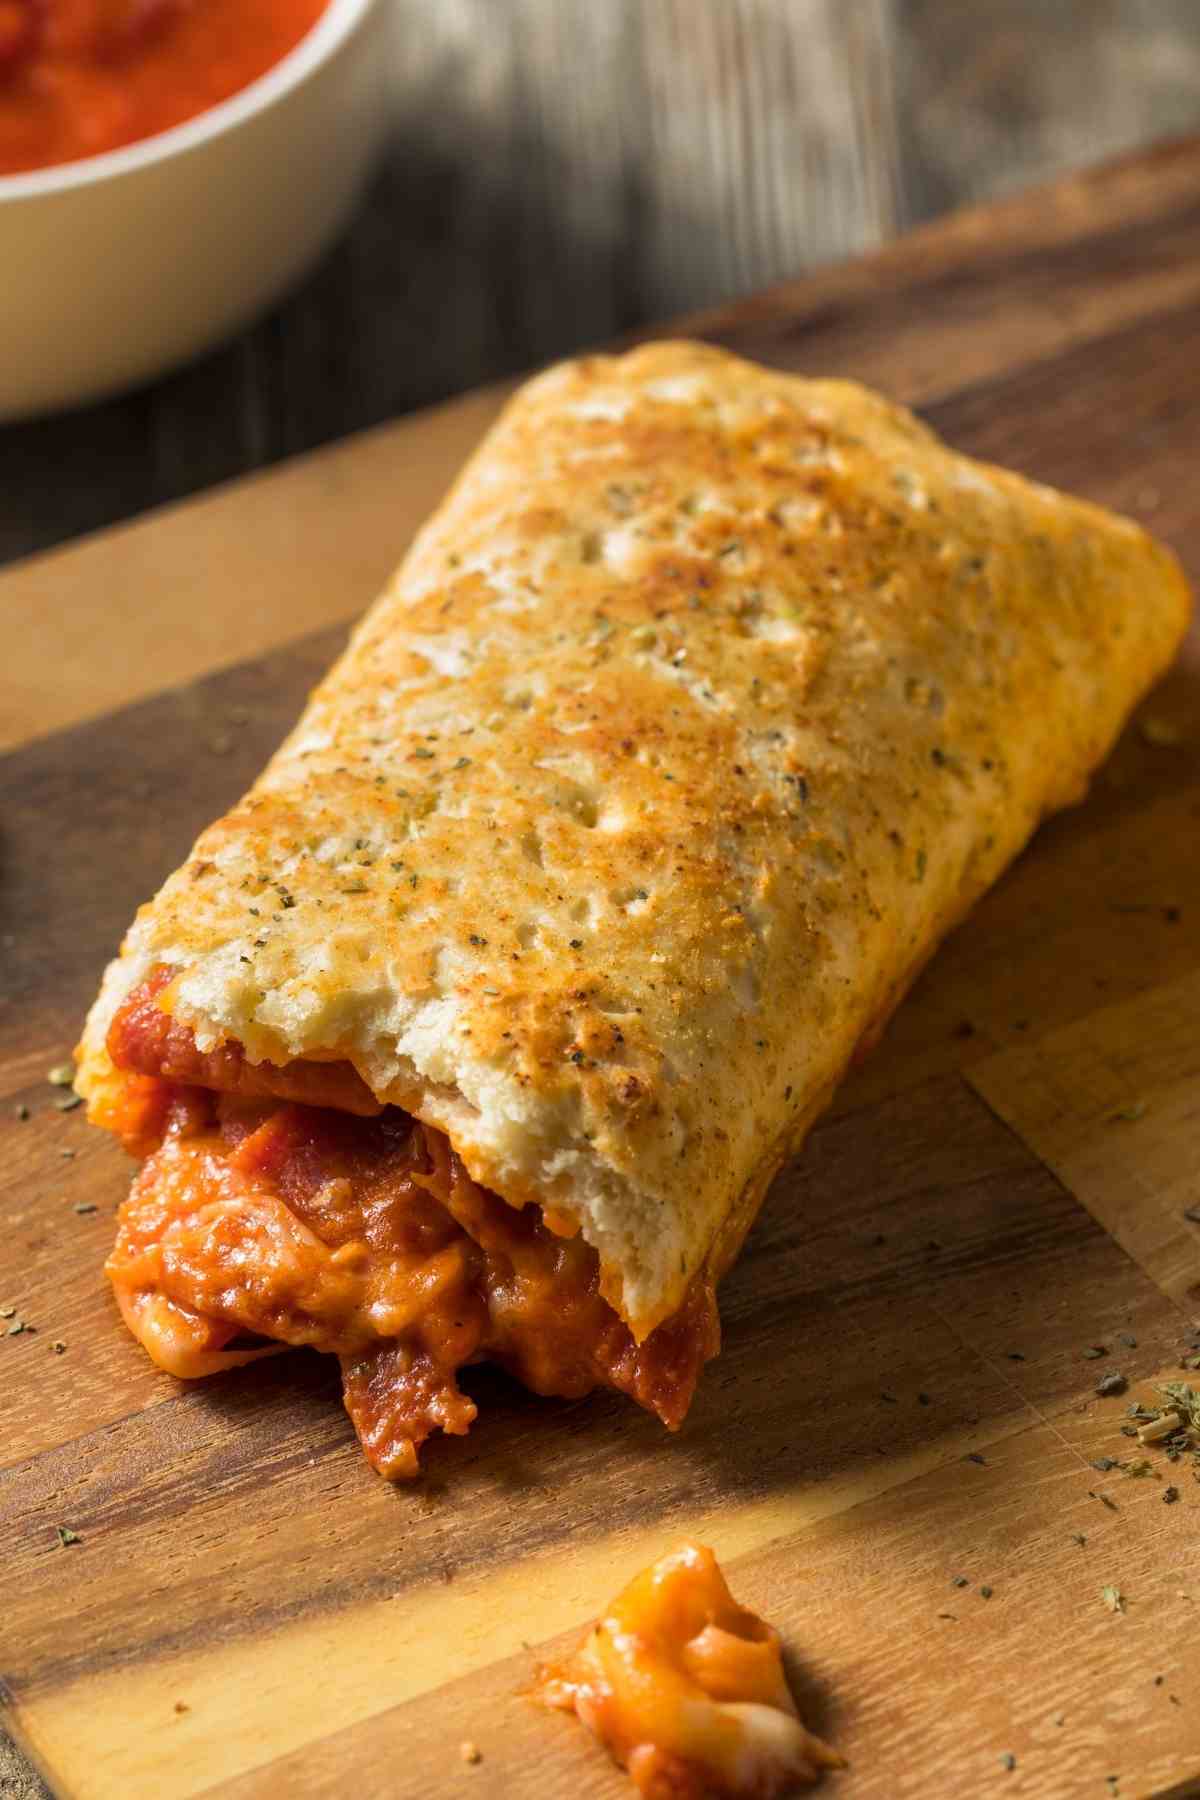 Hot Pockets are a fast and easy snack or a light lunch. They come in a variety of flavors and kids love them. If you’re in a rush, the easiest way to heat up a Hot Pocket is in the microwave. In today’s article we’re sharing some tips and tricks on how to safely heat Hot Pockets in the microwave.